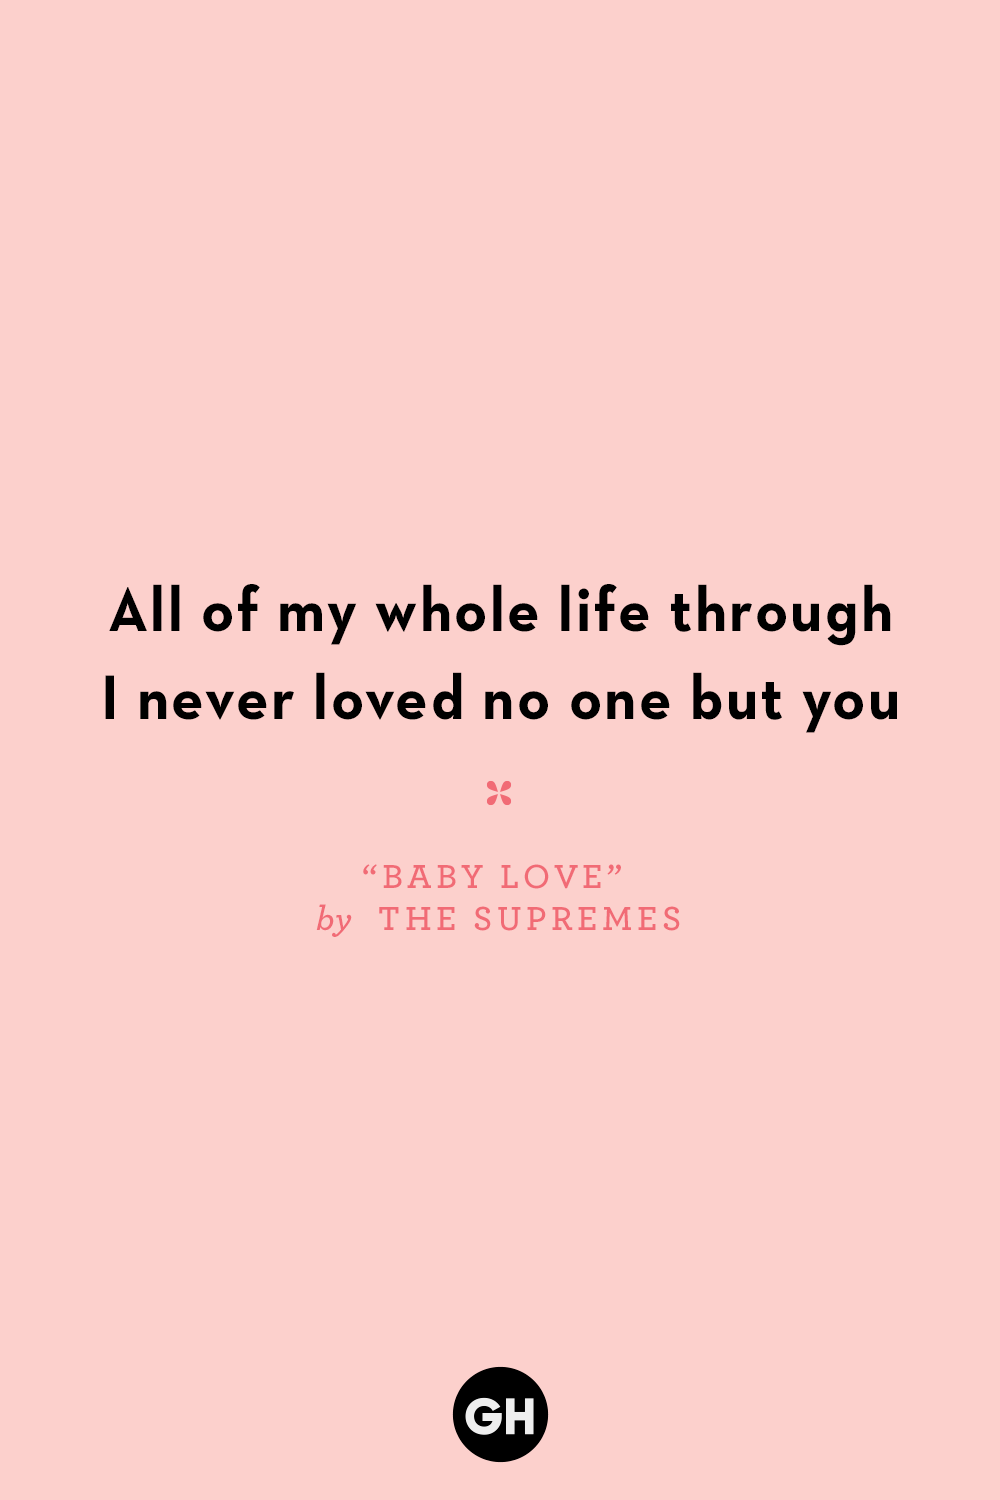 64 Best Love Song Lyrics - Quotes and Lines From Romantic Songs